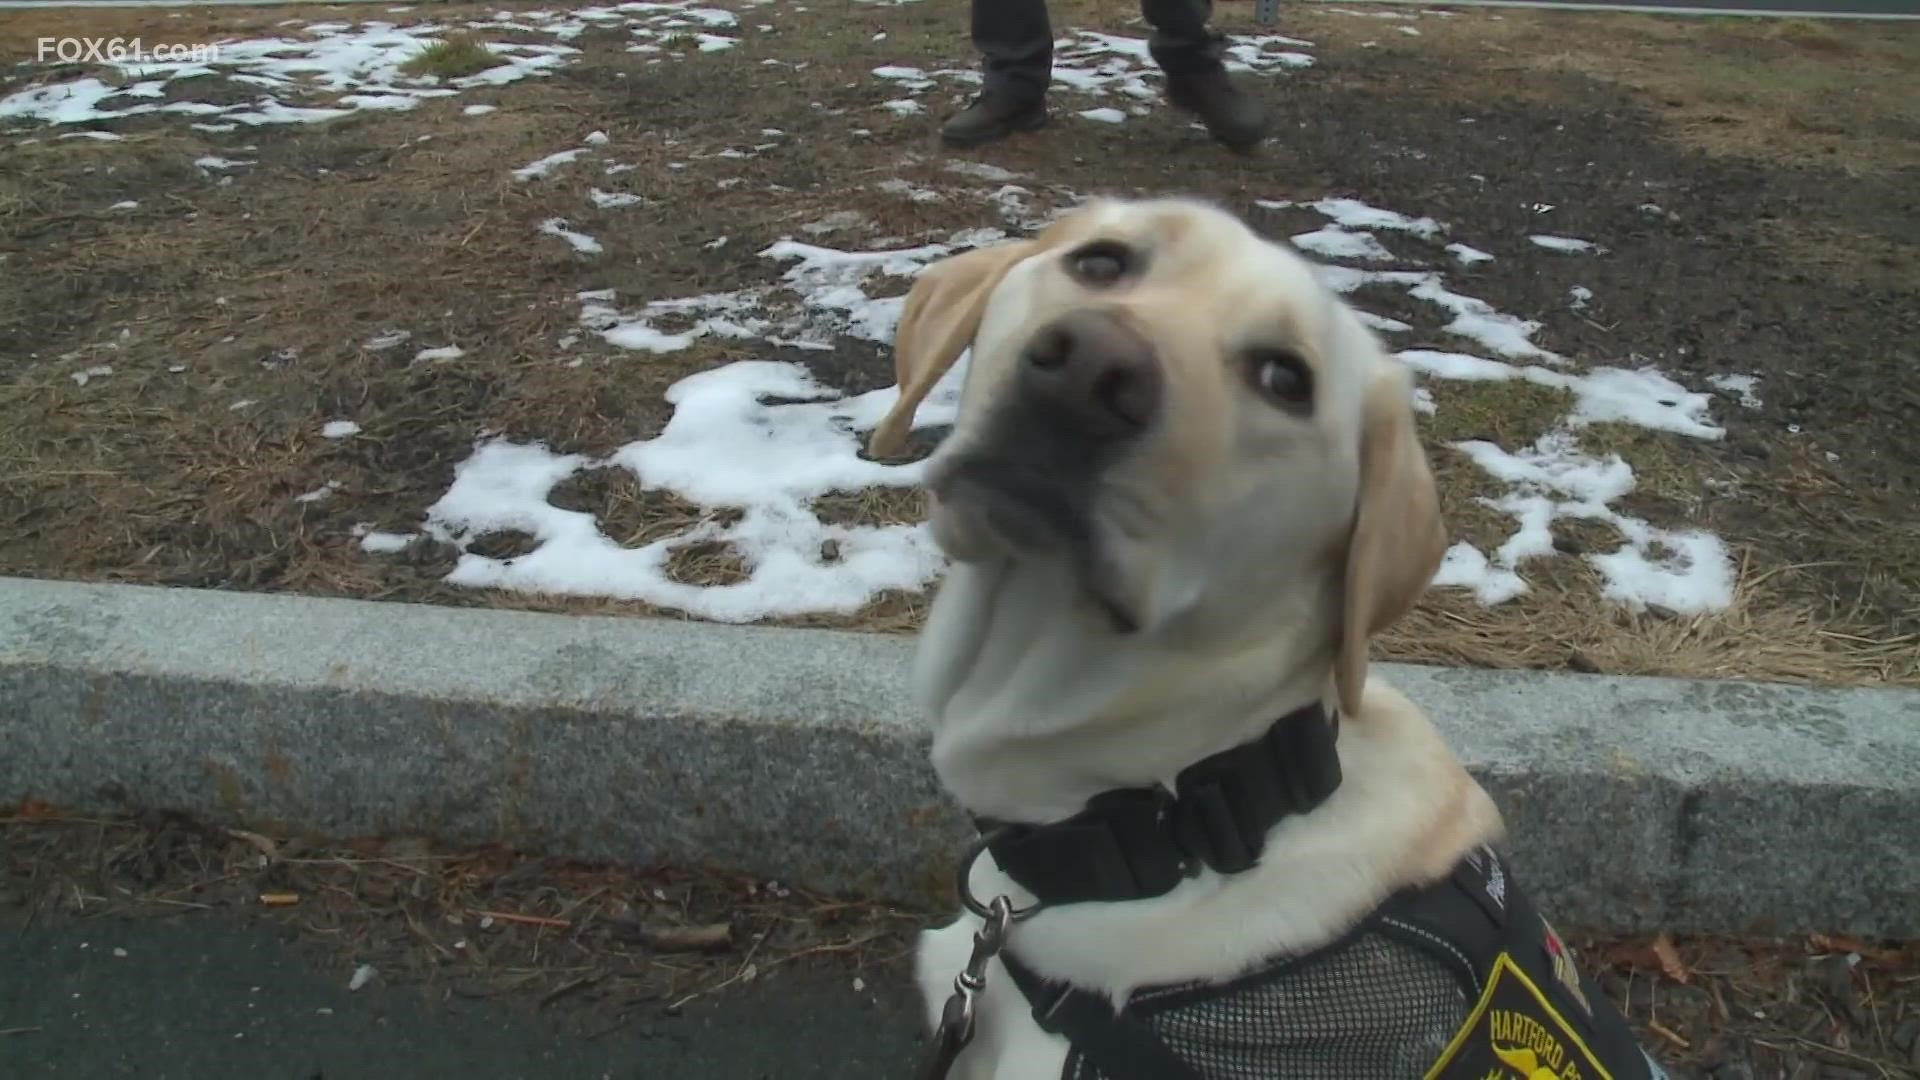 The Hartford Police Department is now one of 12 police departments with comfort dogs. Bristol, Farmington, and Naugatuck are among the latest.